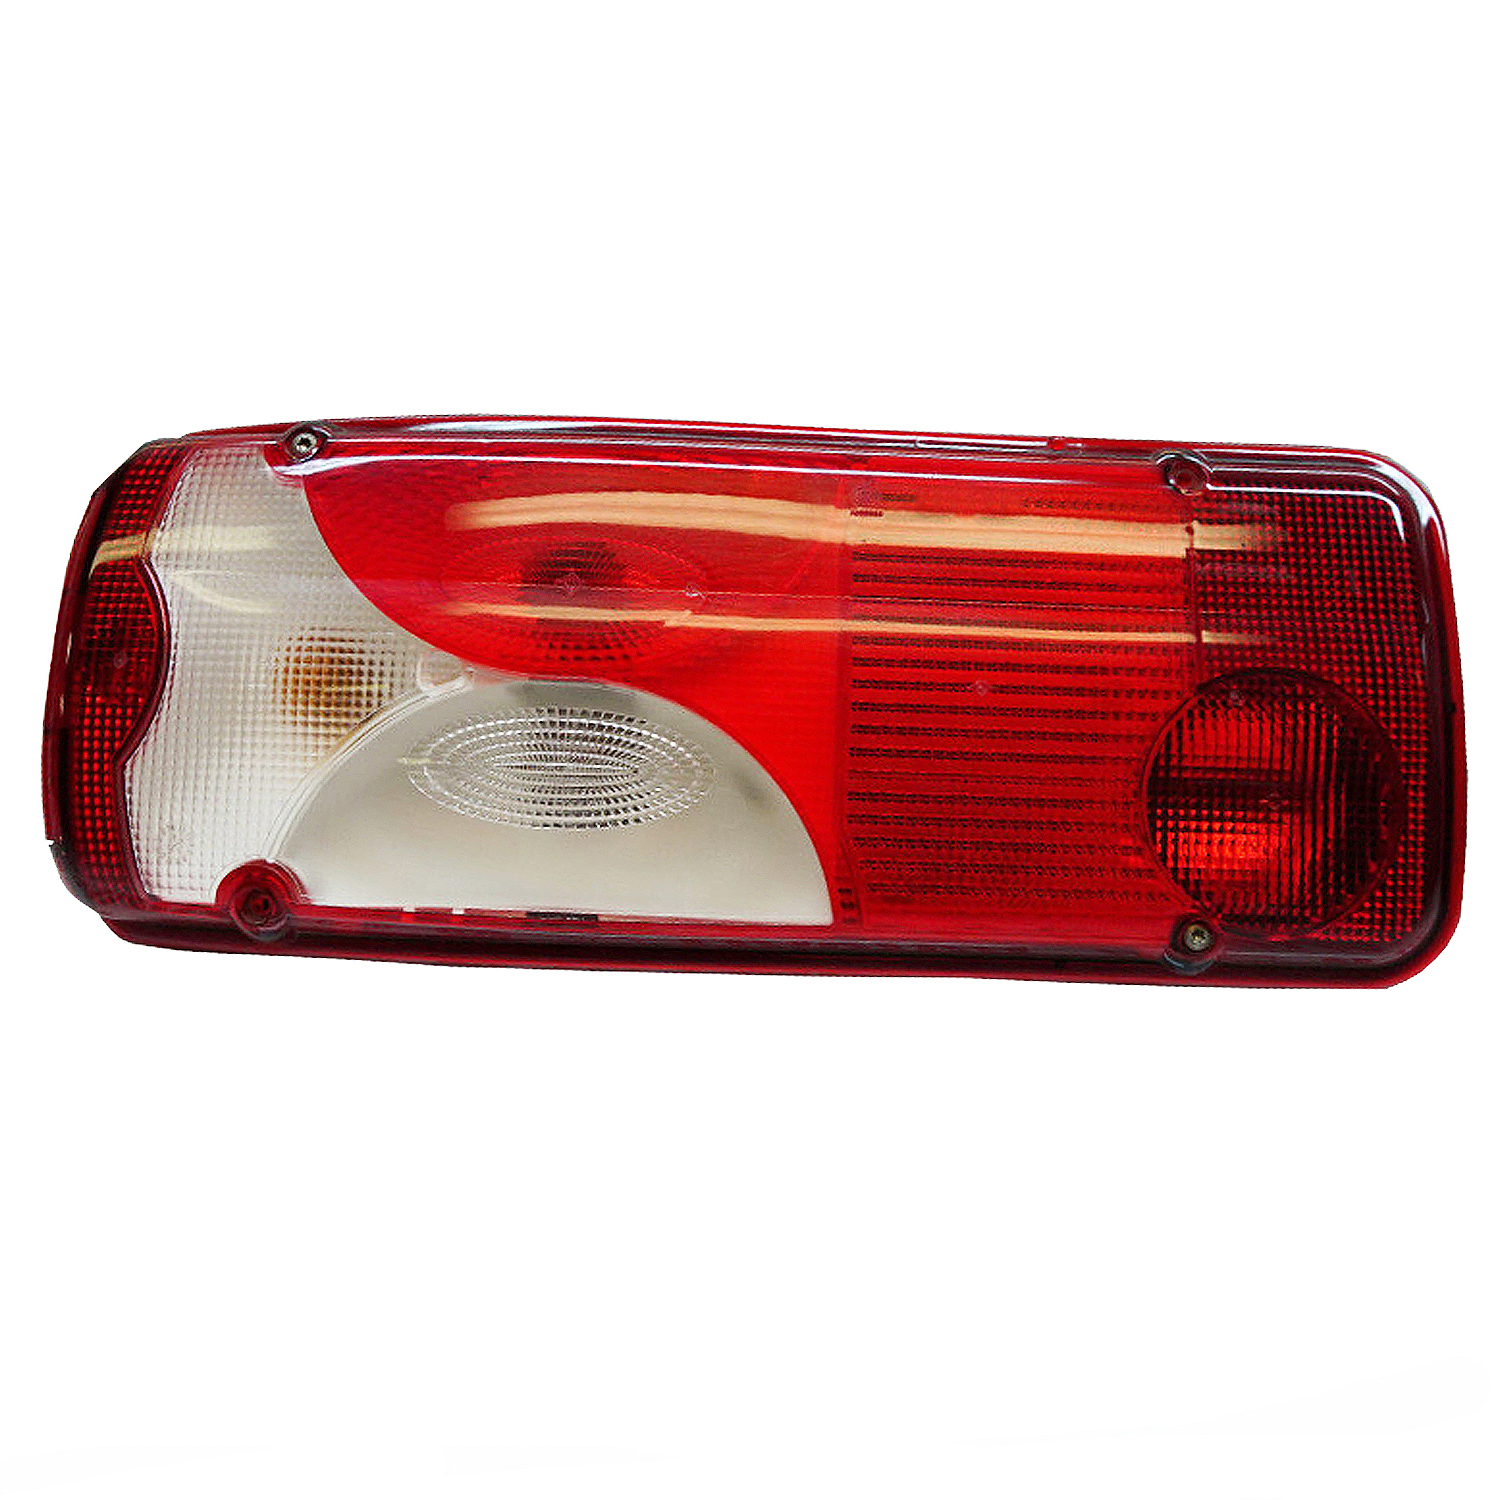 Mercedes Sprinter CHASSIS CAB VAN REAR LAMP LIGHT RIGHT HAND ( UK Driver Side ) 2006 to 2011 – TAIL LAMP LENS